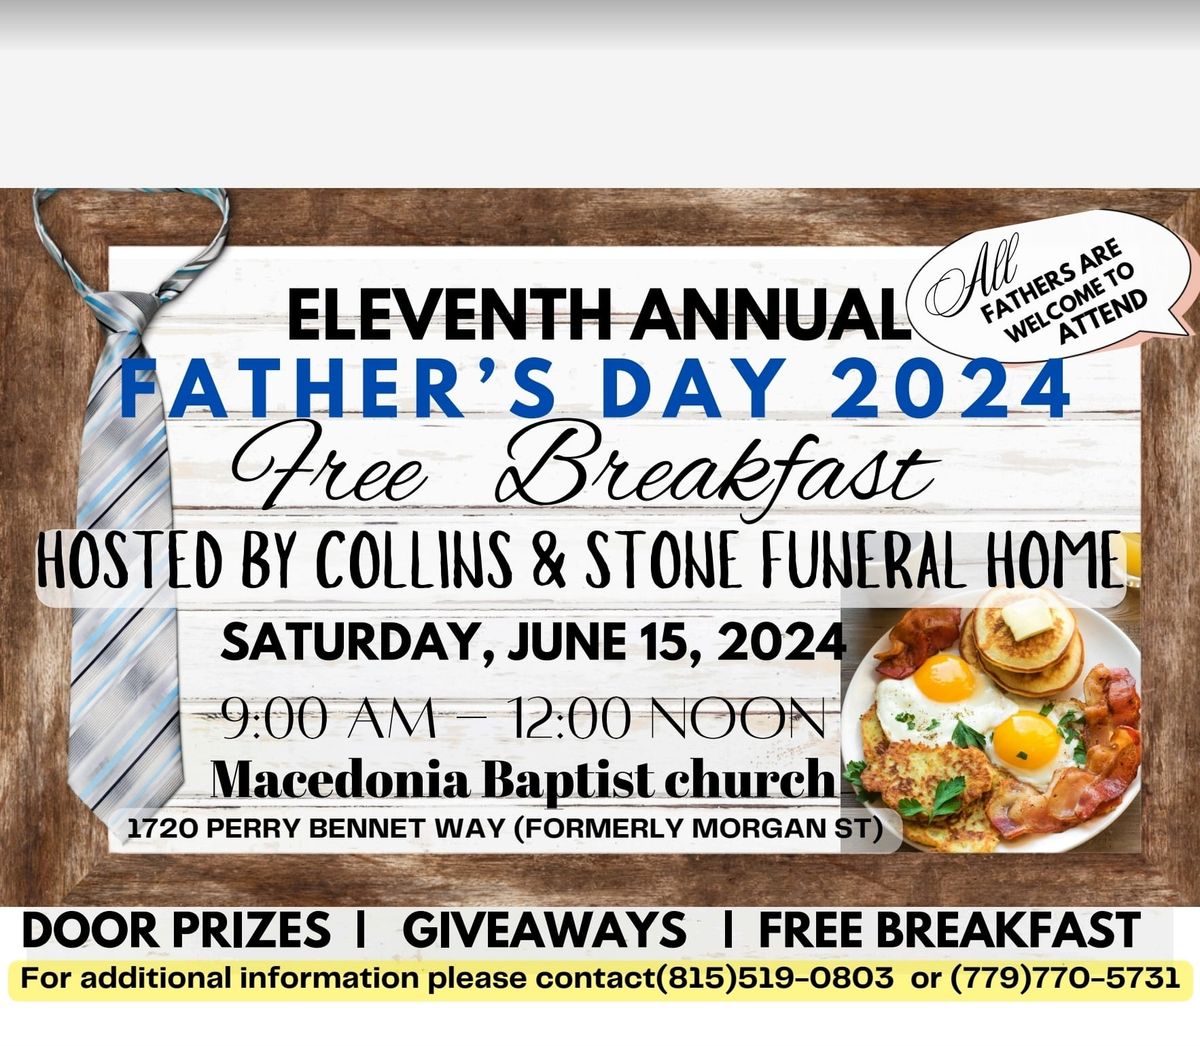 Annual 11th Fathers Day Breakfast